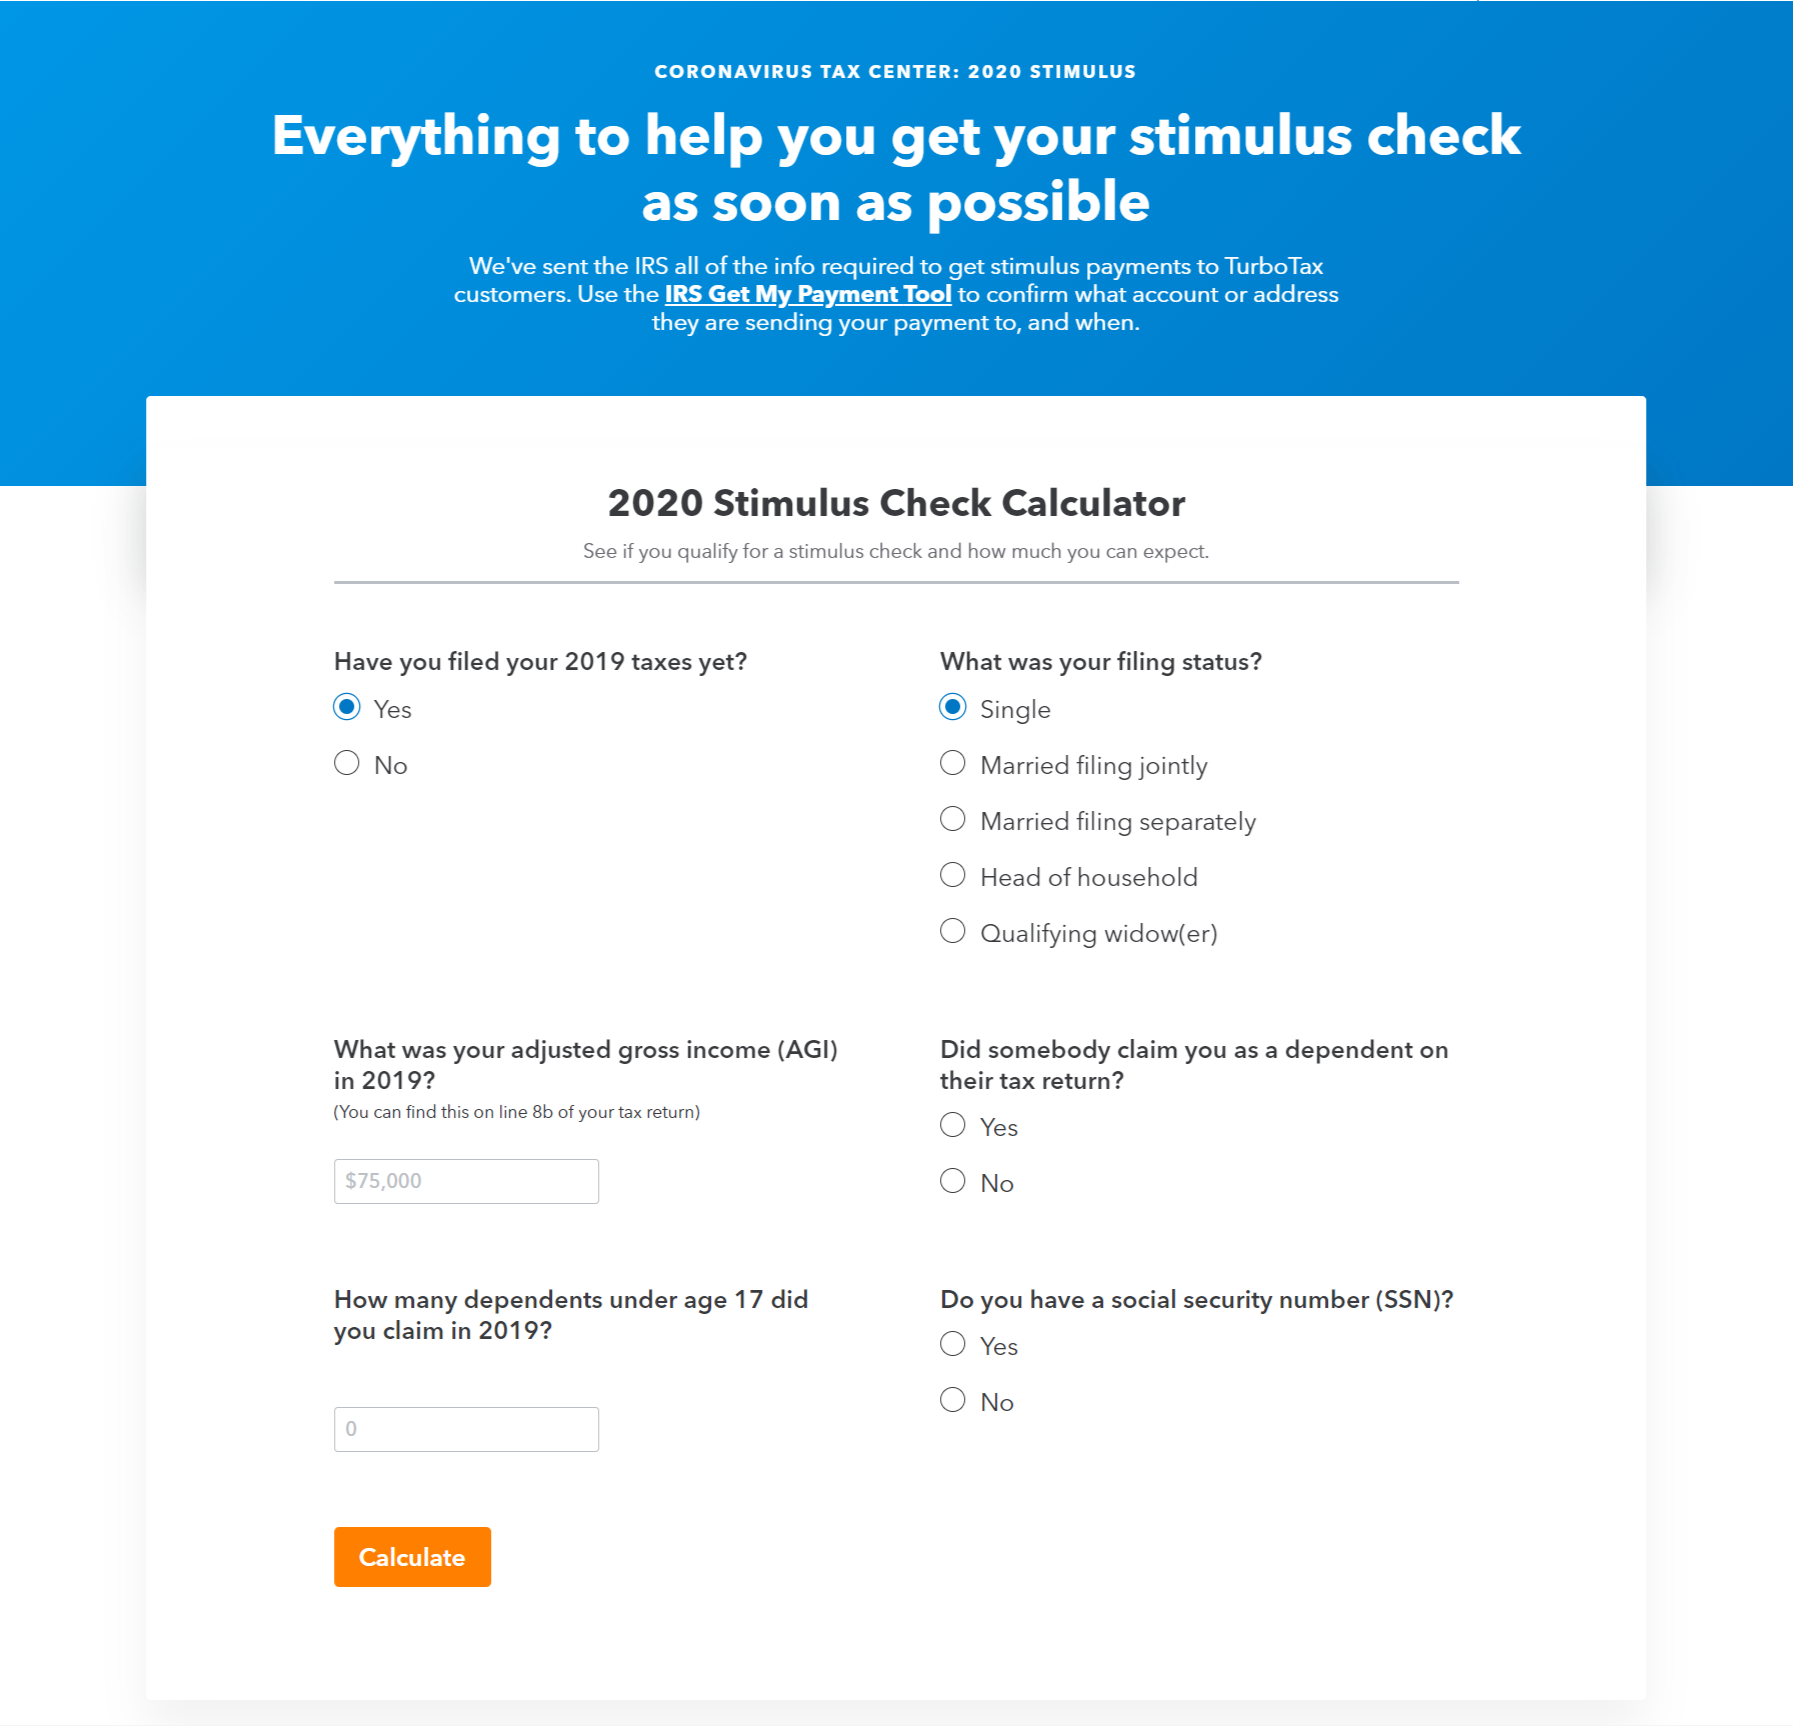 TurboTax uses plenty of white space with blue and orange accents on their Stimulus Check Calculator tool.